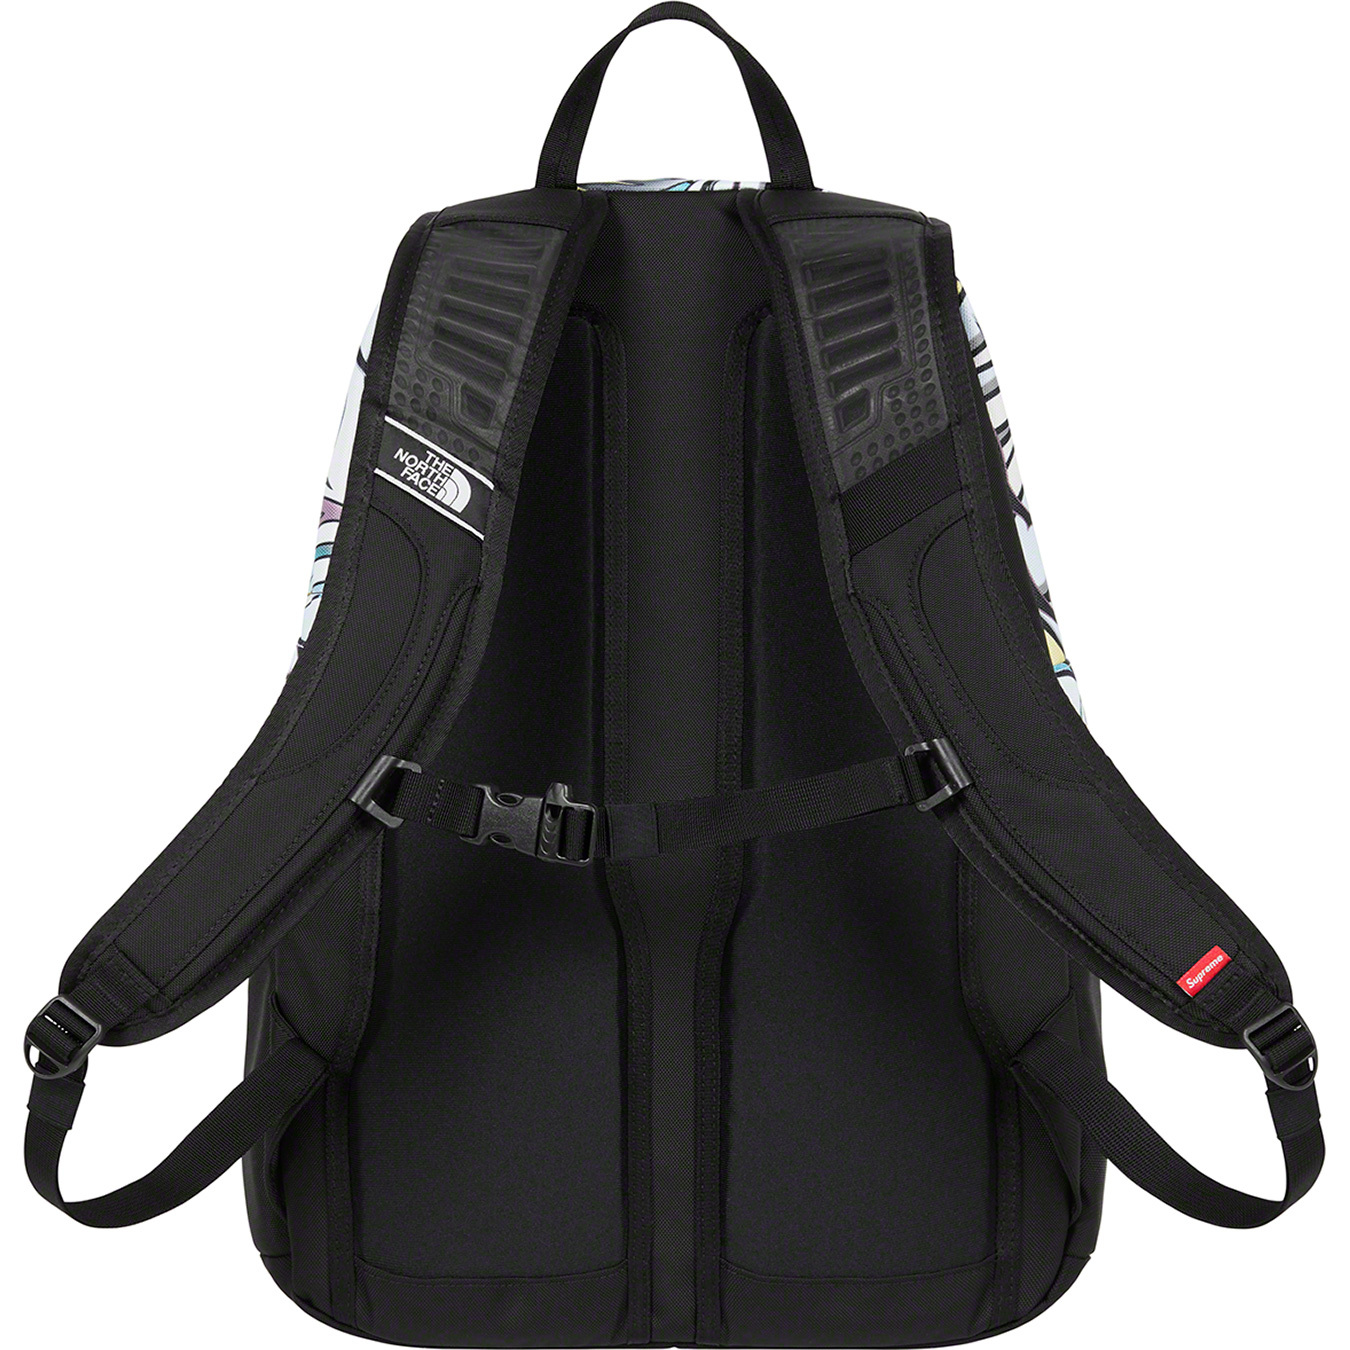 The North Face Steep Tech Backpack - fall winter 2022 - Supreme